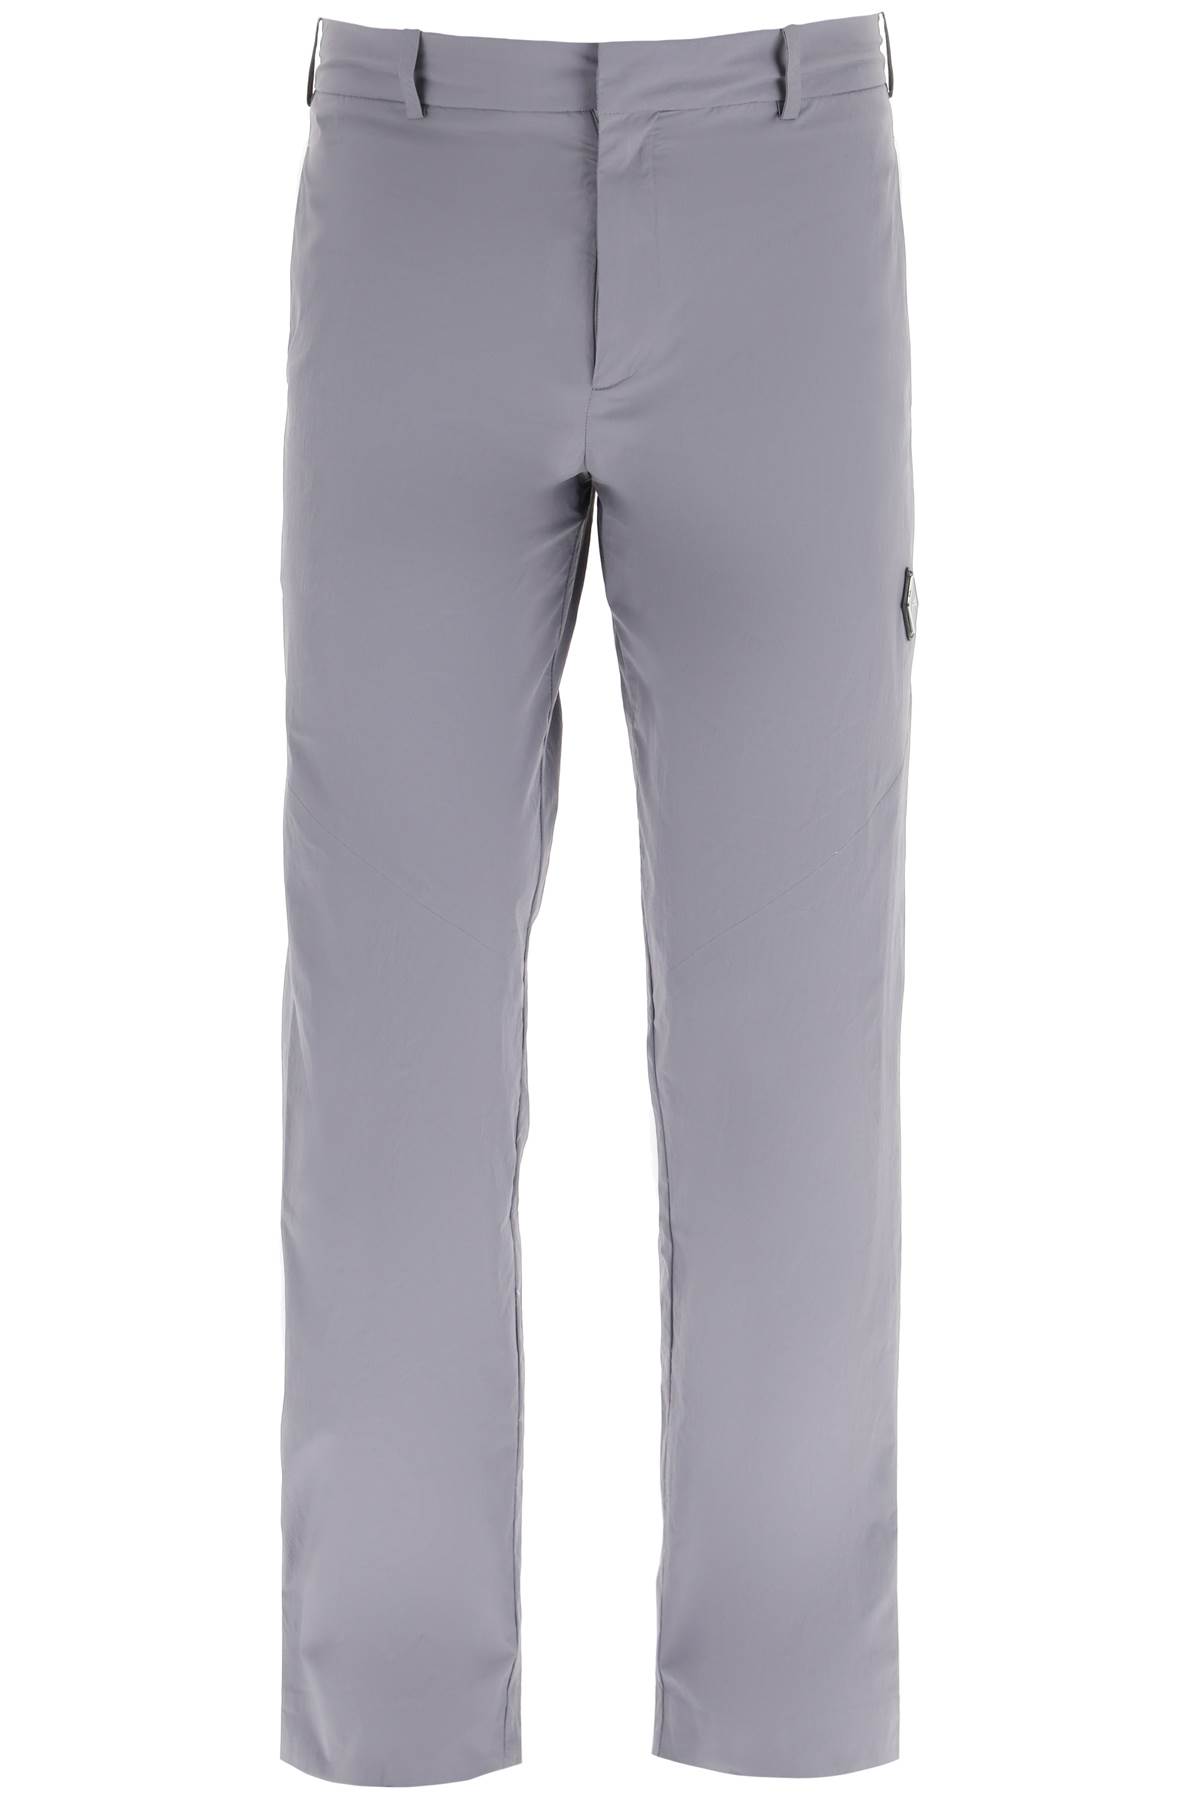 A-COLD-WALL Nylon Stealth Trousers